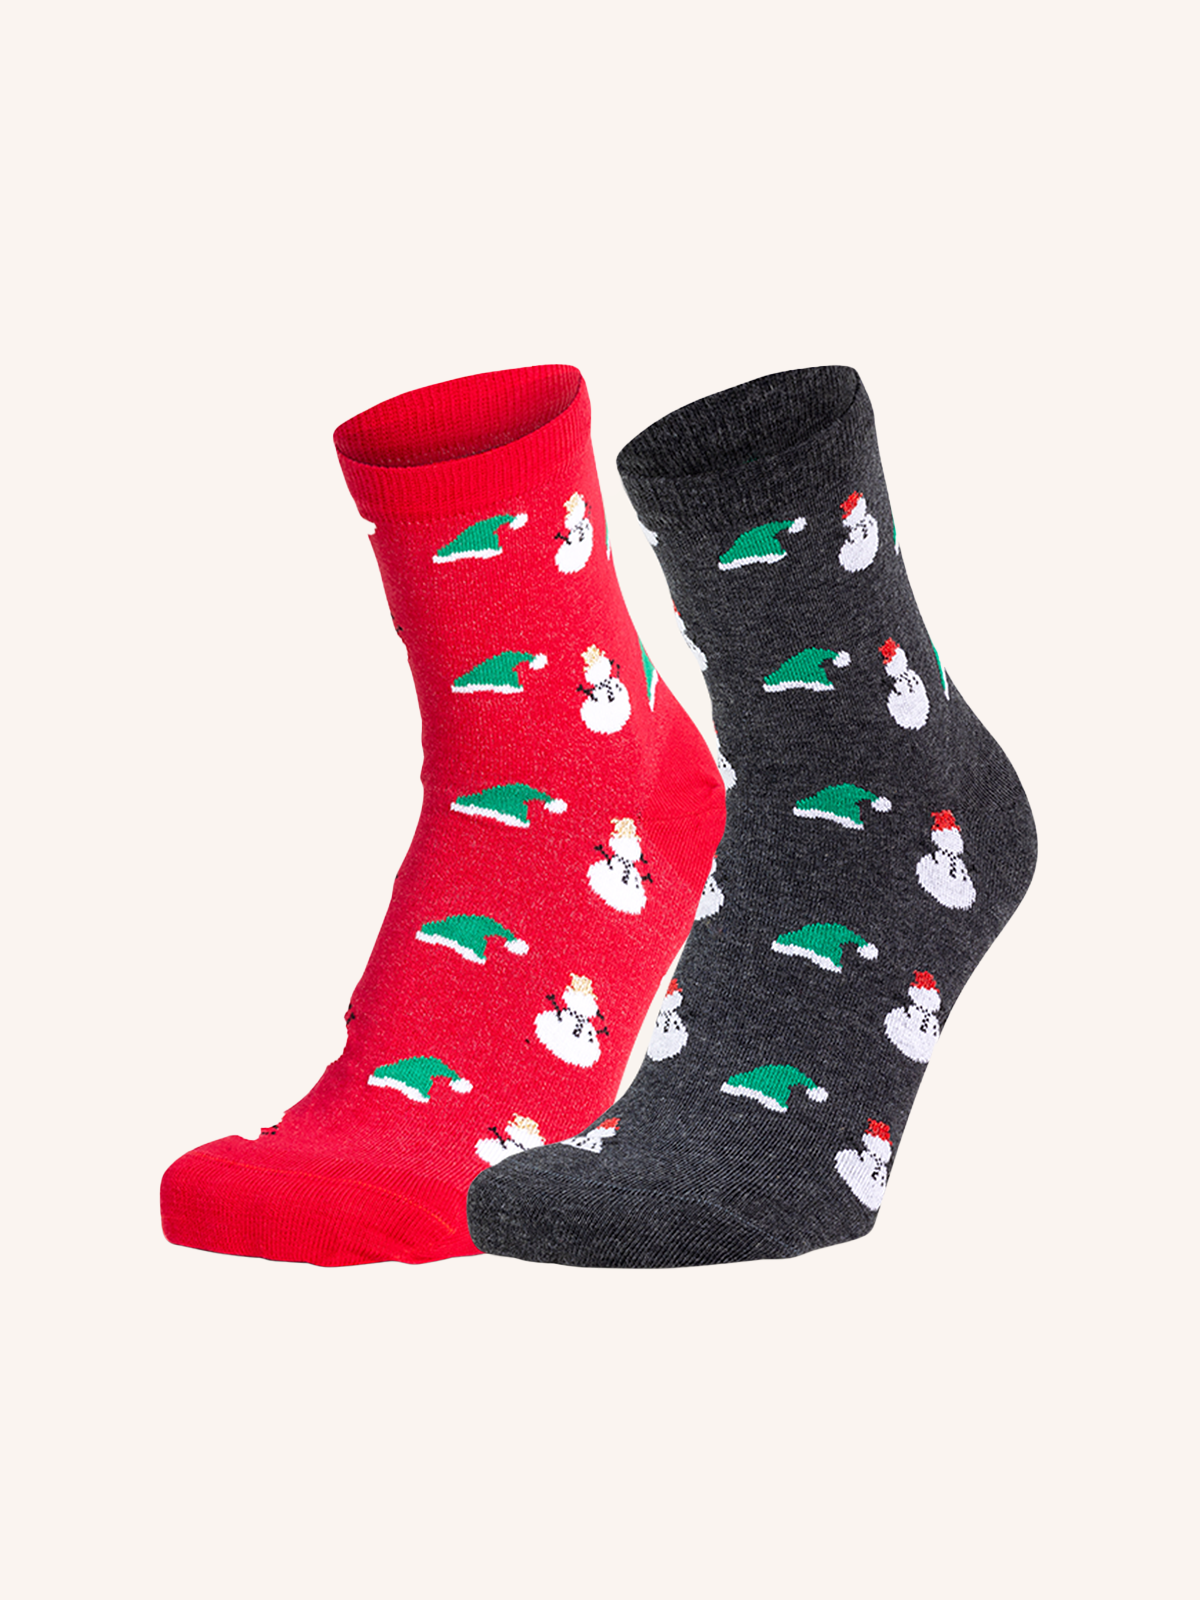 Short Sock in Warm Cotton for Women | Christmas Pattern | Pack of 2 Pairs | Xmas DC